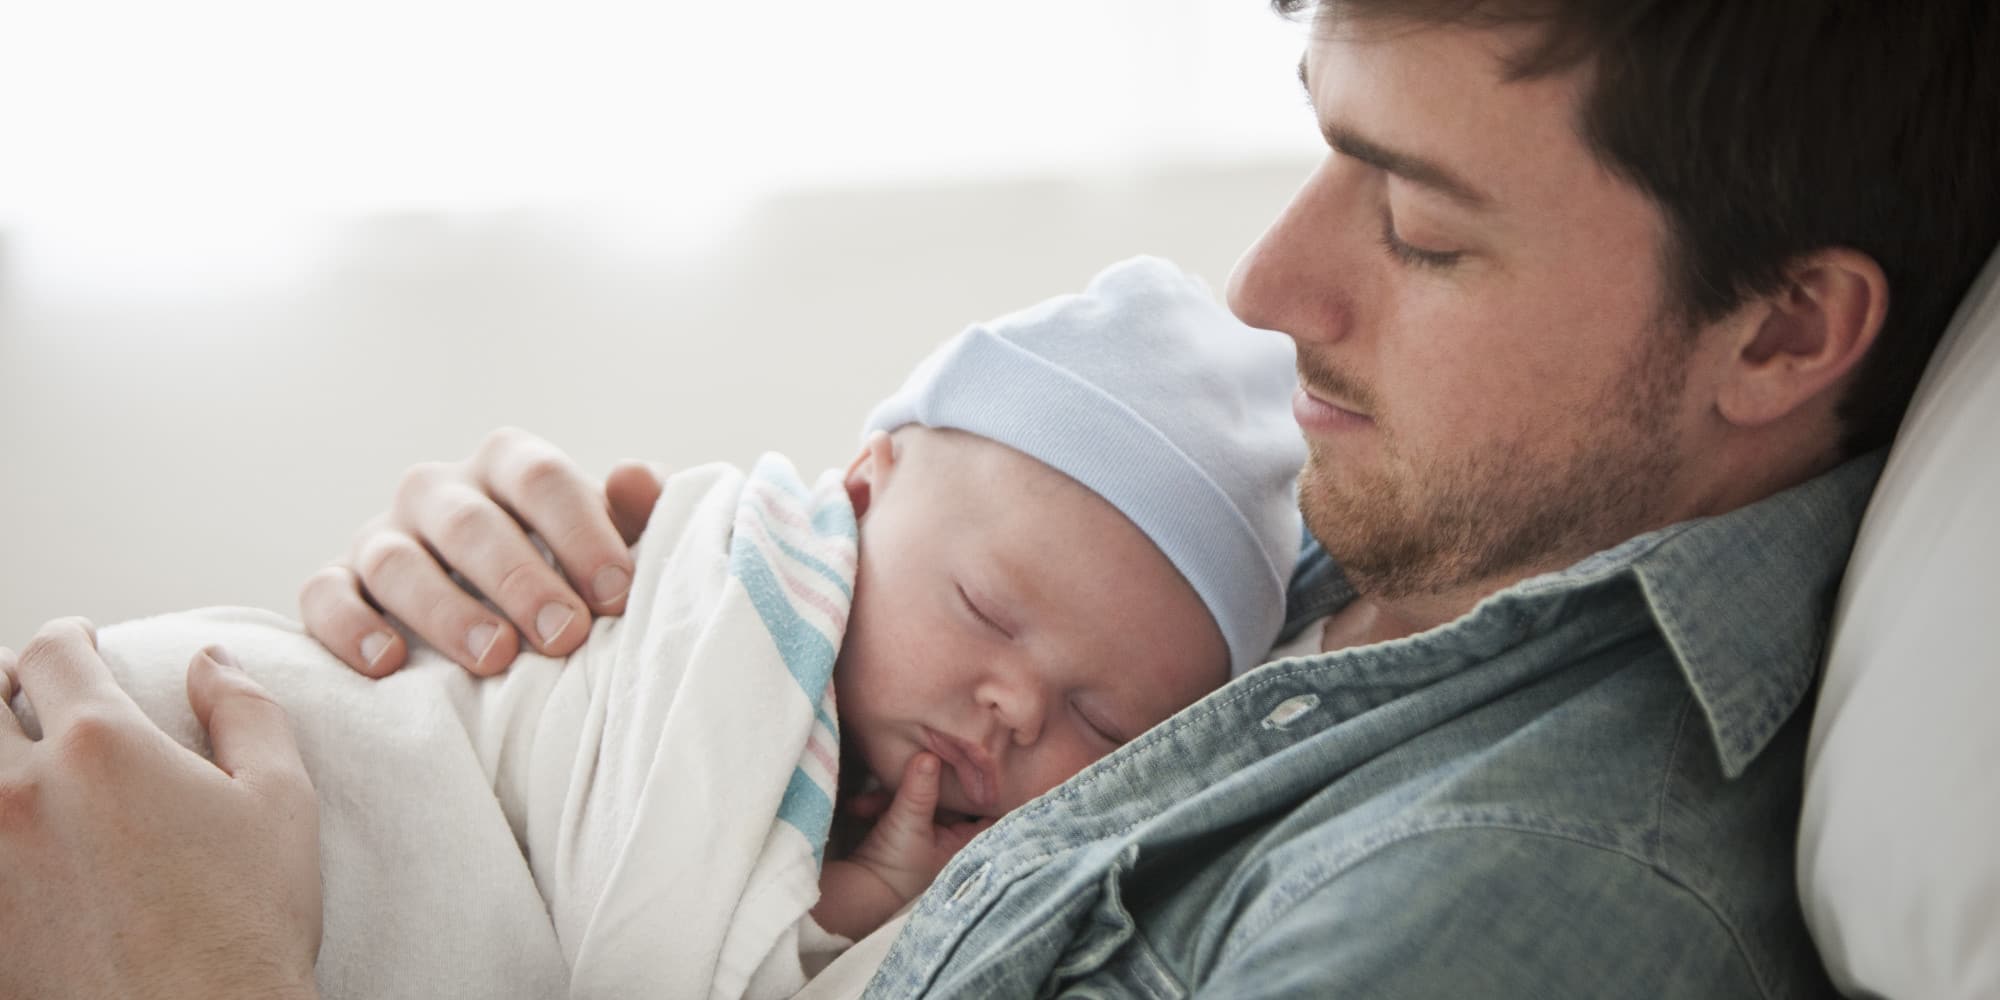 looklike dad could give babies a healthier start in life